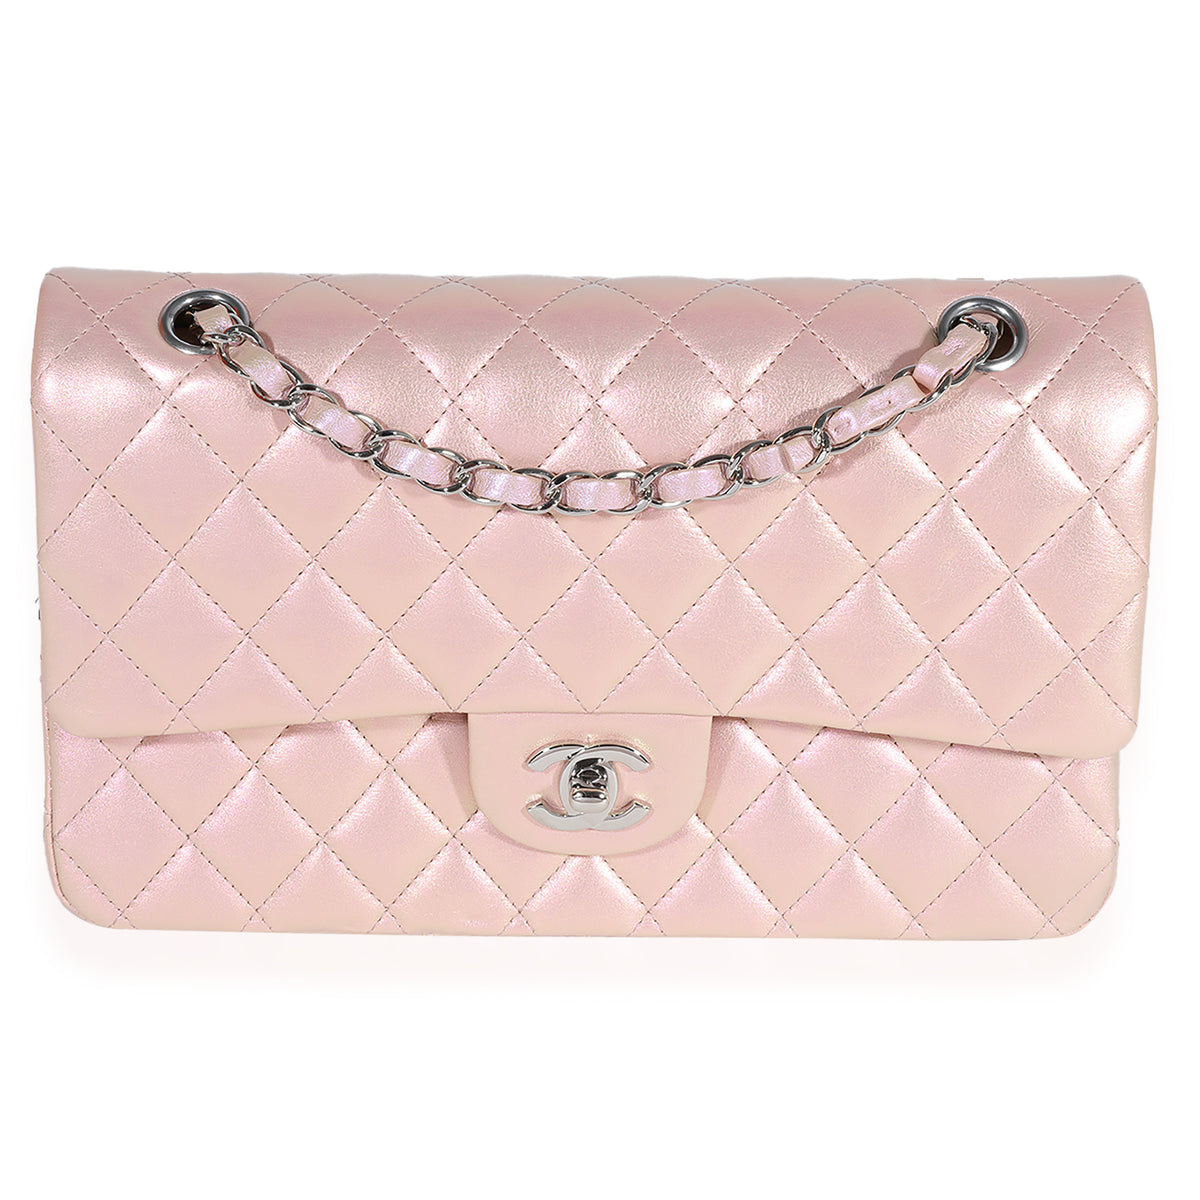 Chanel Iridescent Pink Quilted Lambskin Medium Classic Double Flap Bag, myGemma, CA